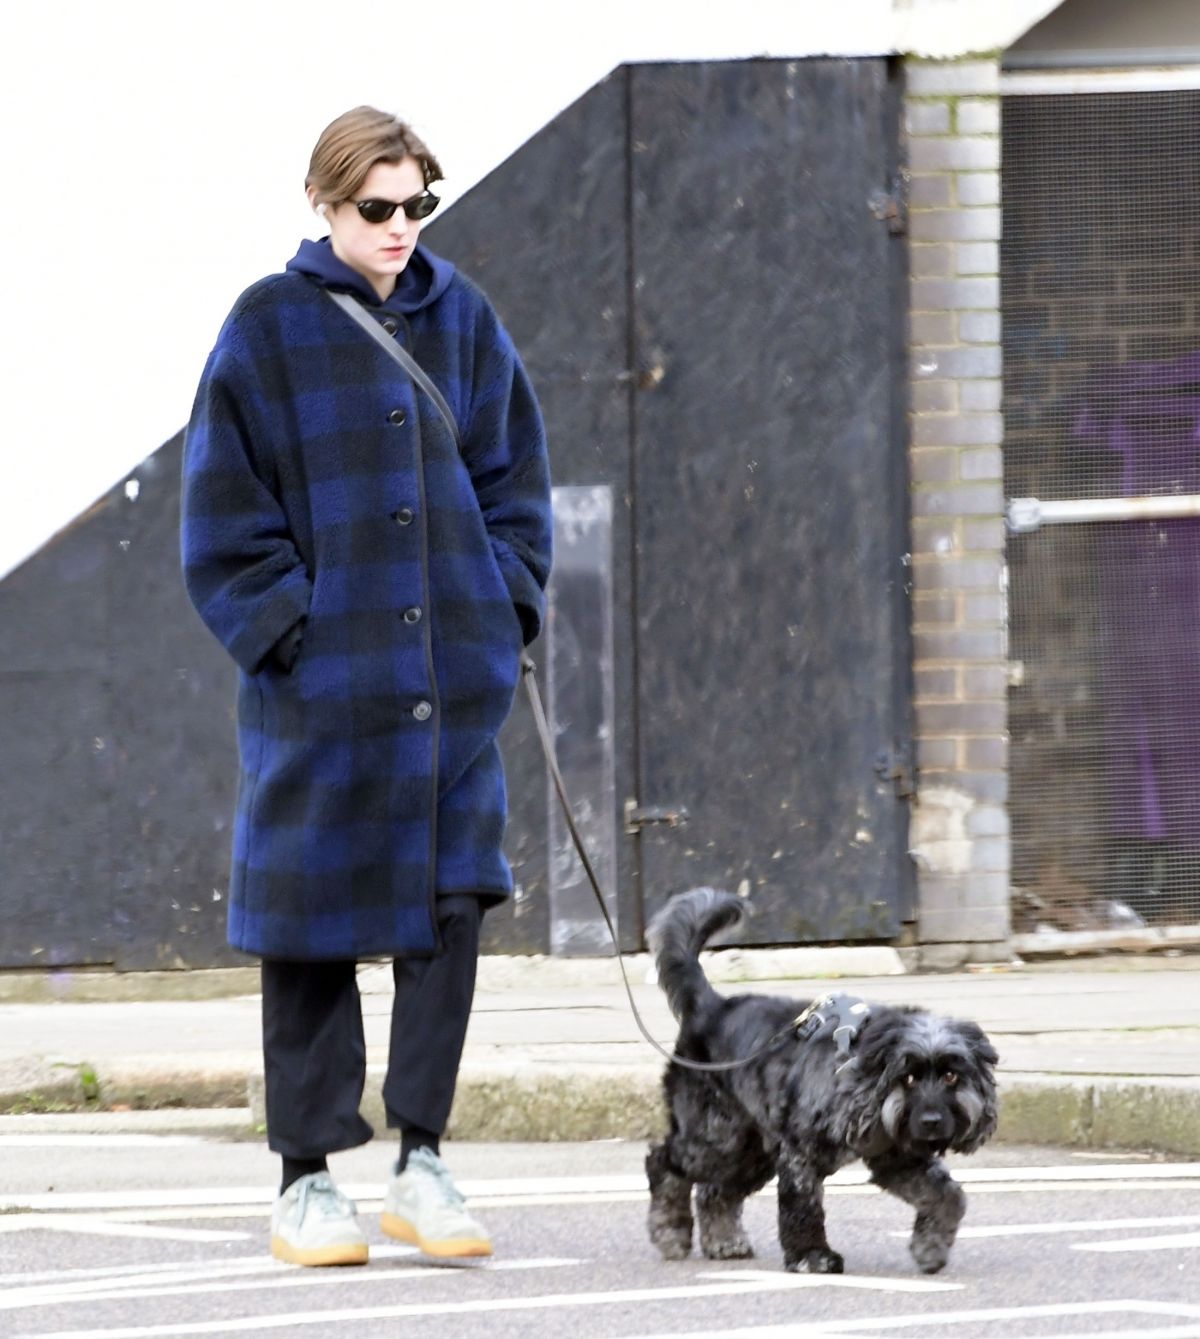 emma-corrin-out-with-her-dog-in-london-01-17-2021-6.jpg